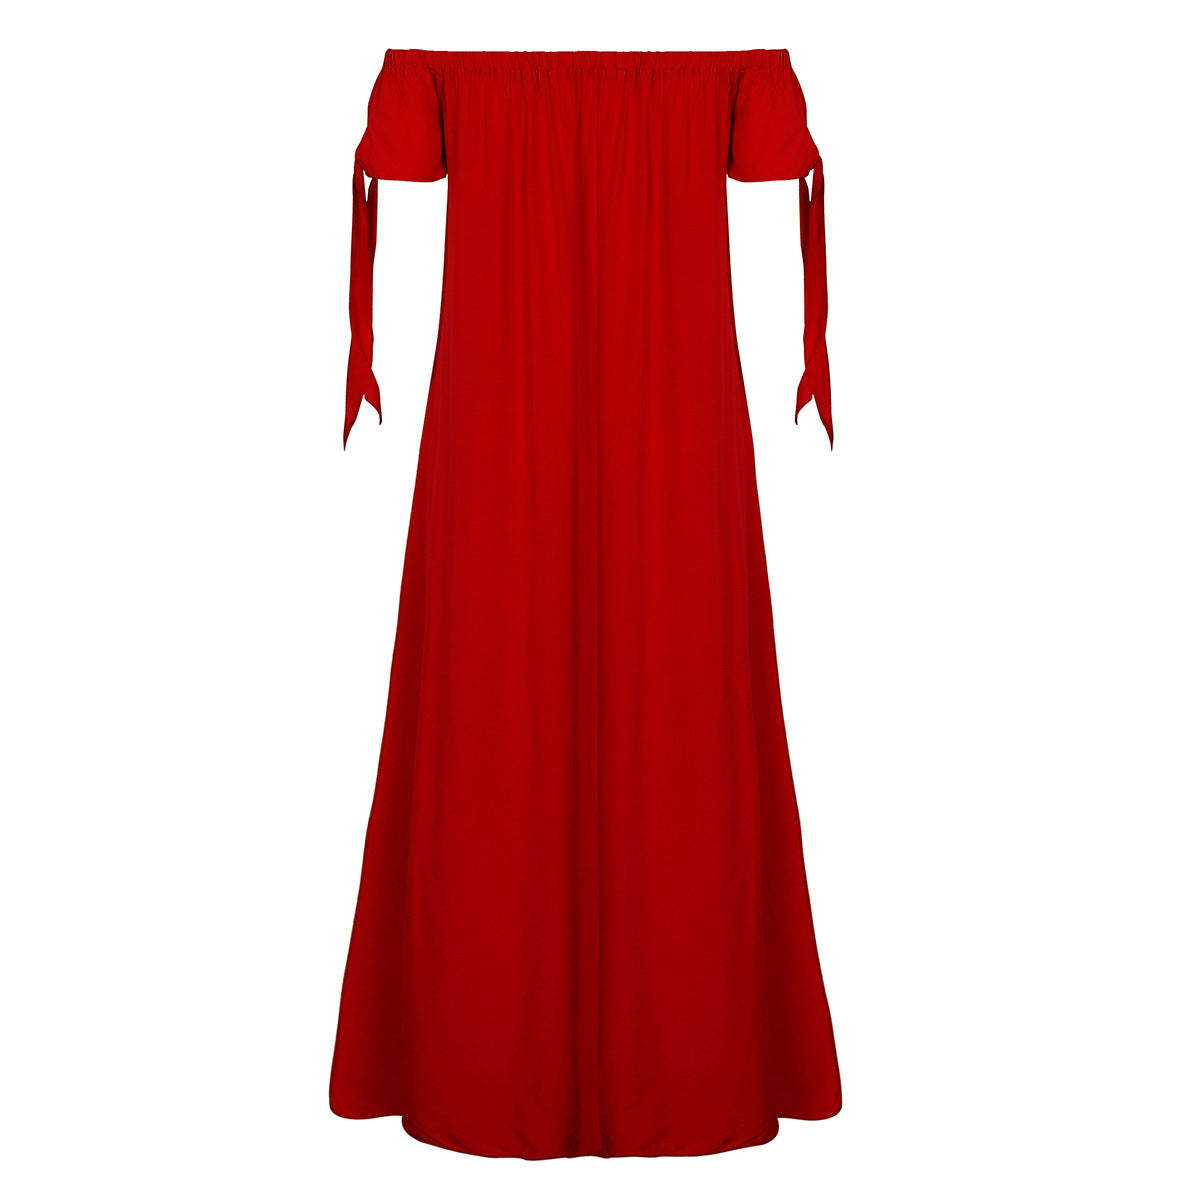 A Summer Straight Shoulder Split Beach Dress masterpiece in red by Beachy Cover Ups.